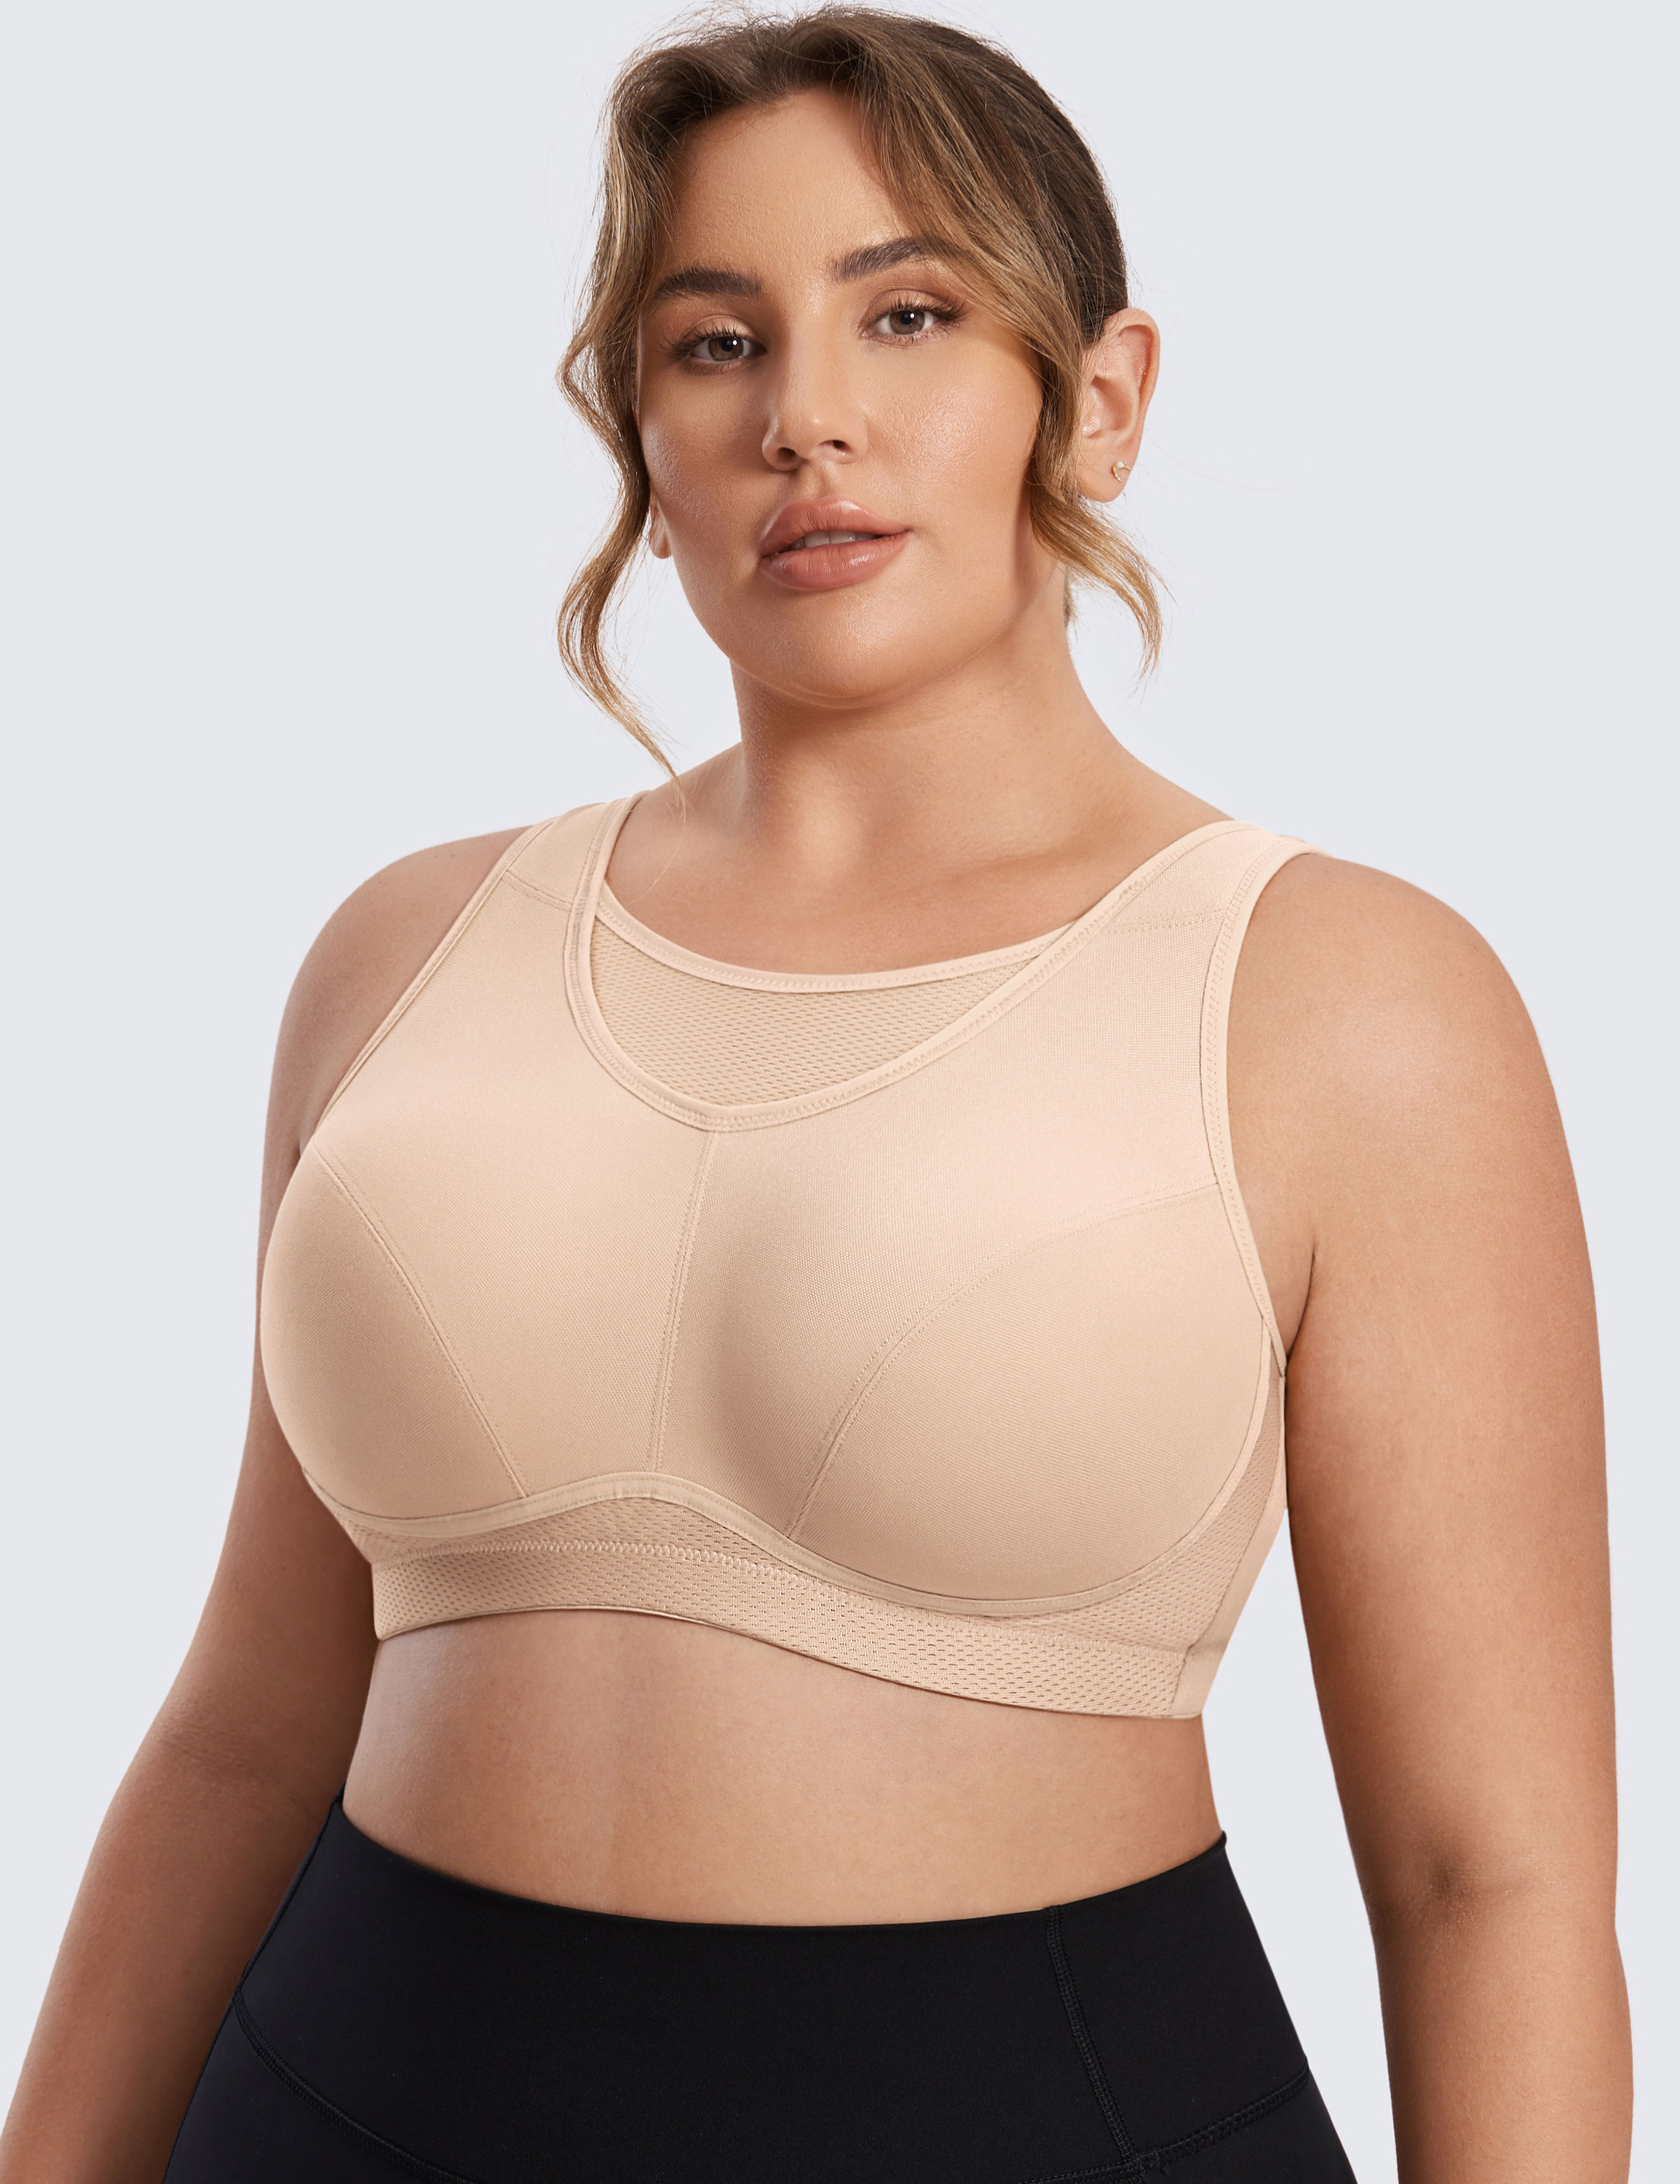 Womens Wire Free Sports Bra Plus Size High Impact No Bounce Full Coverage Ebay 